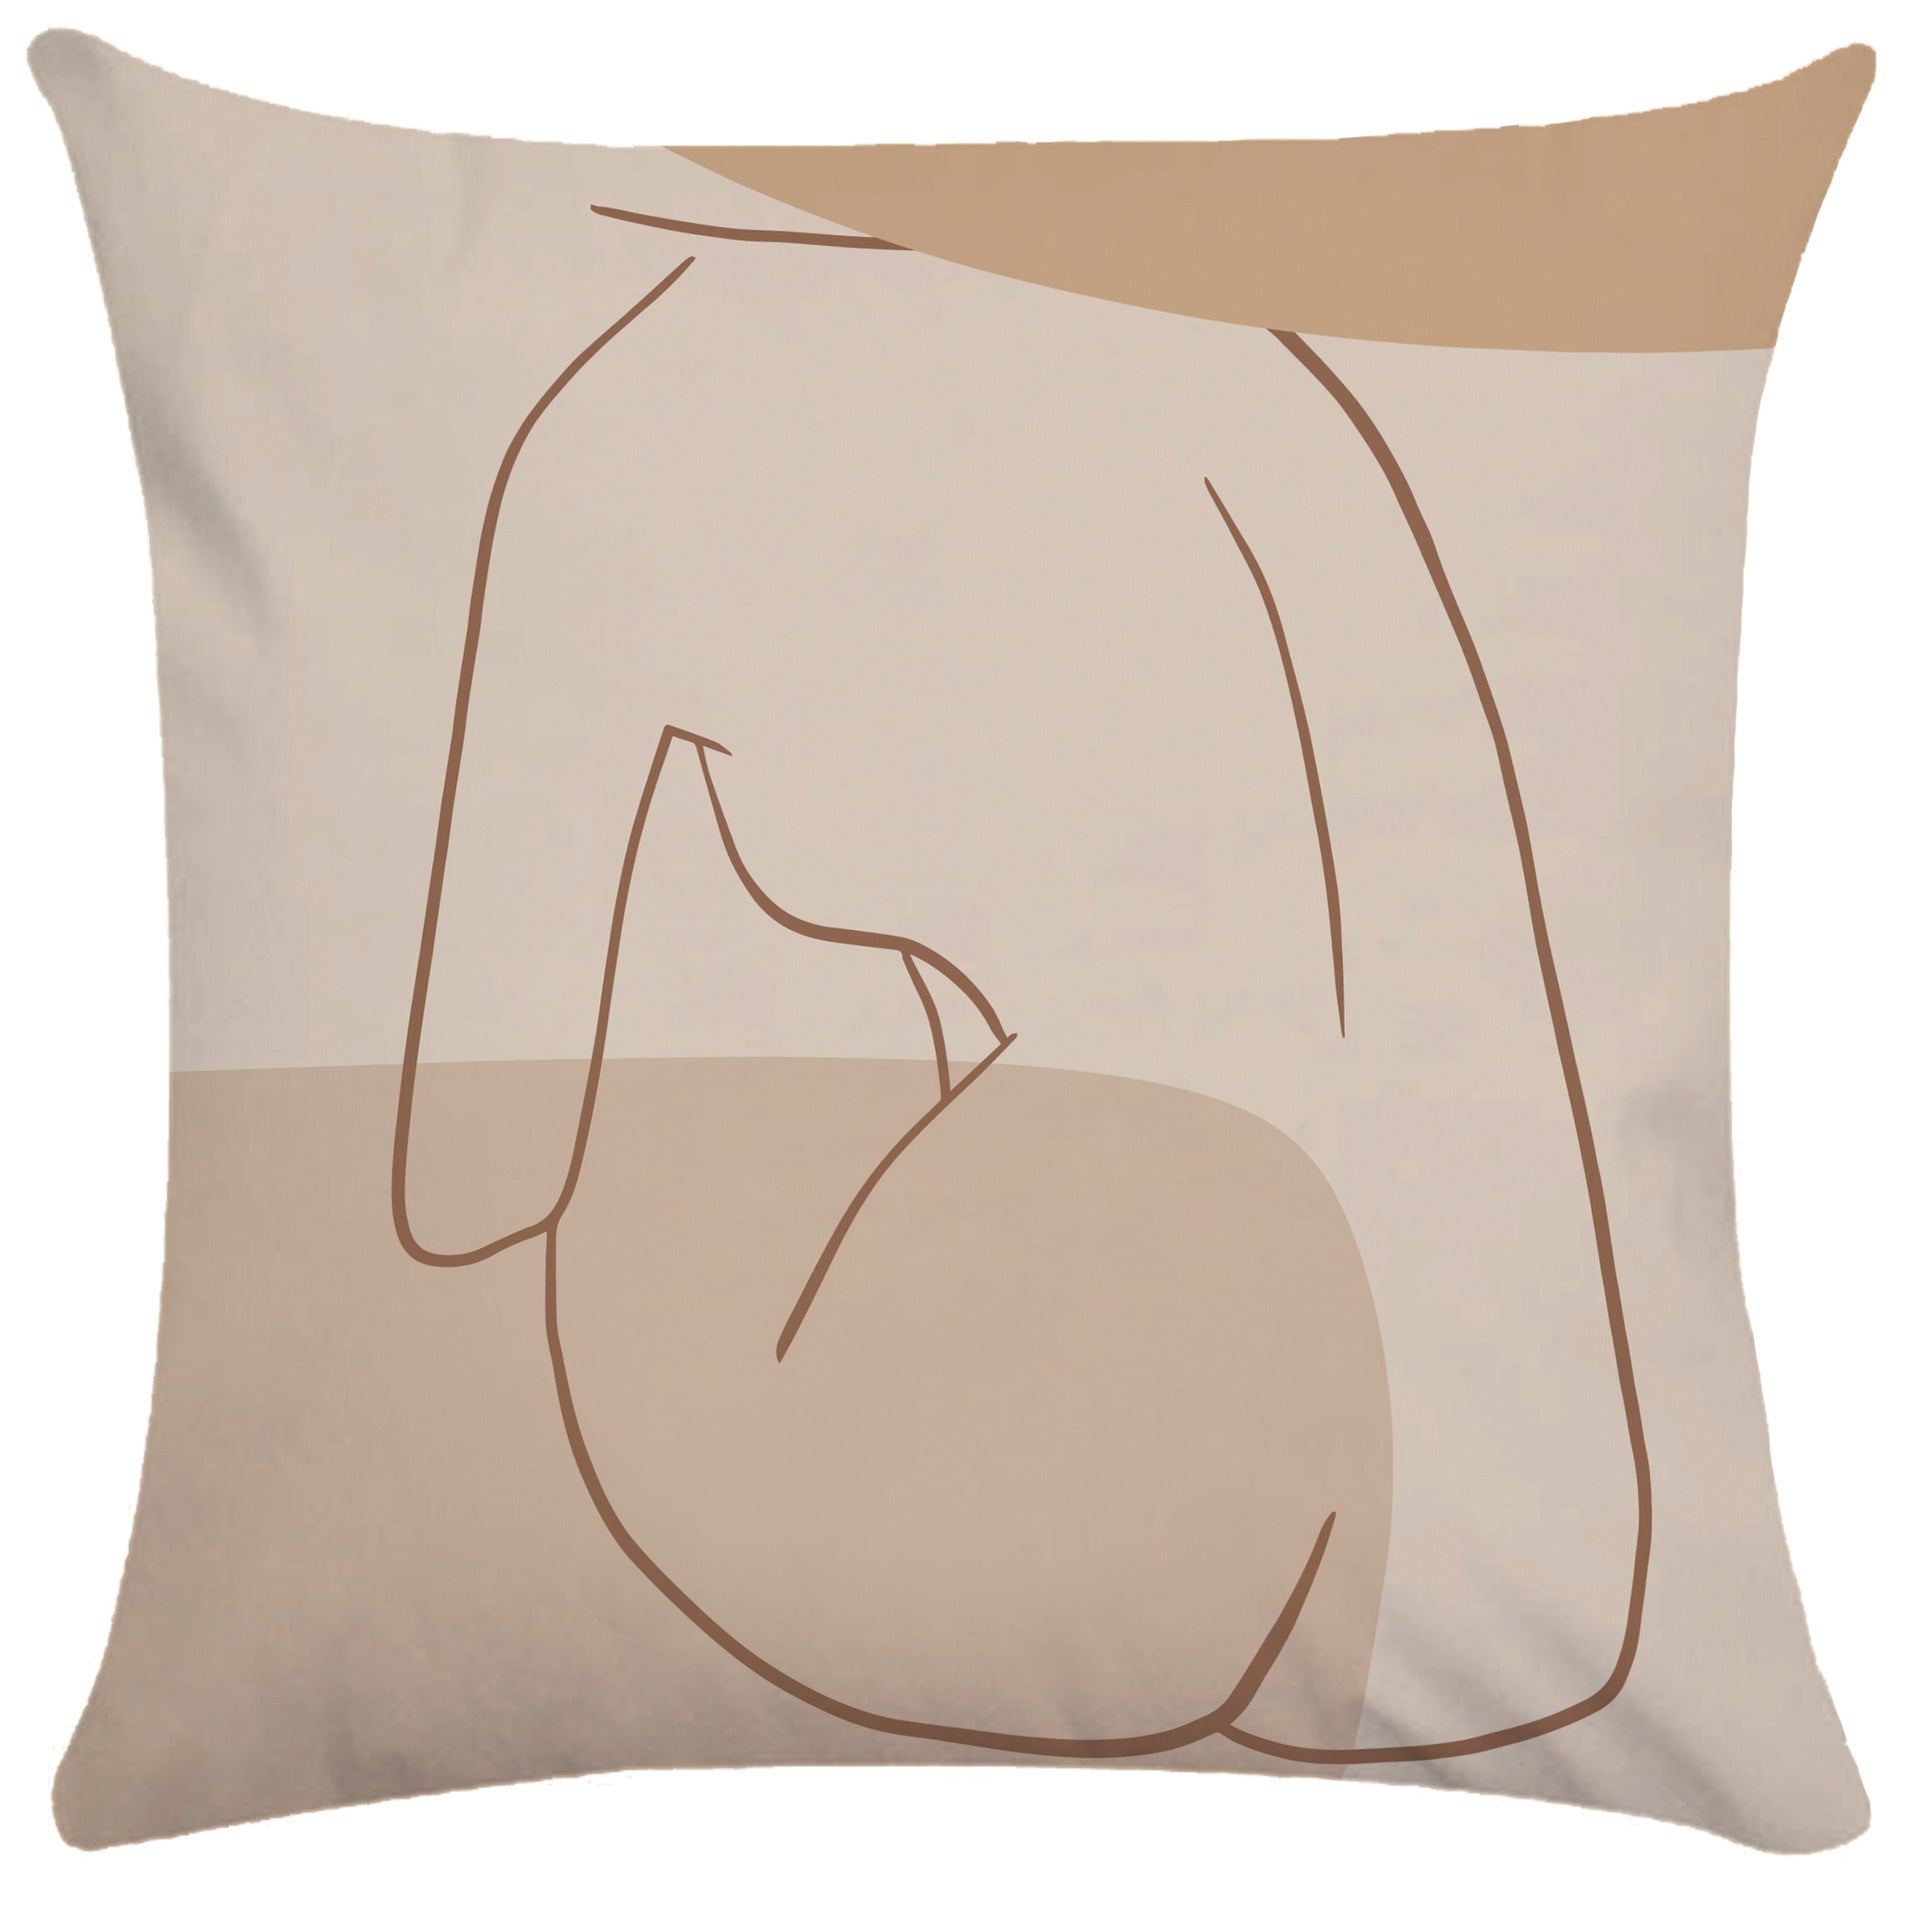 Pillowcase With An Abstract Design